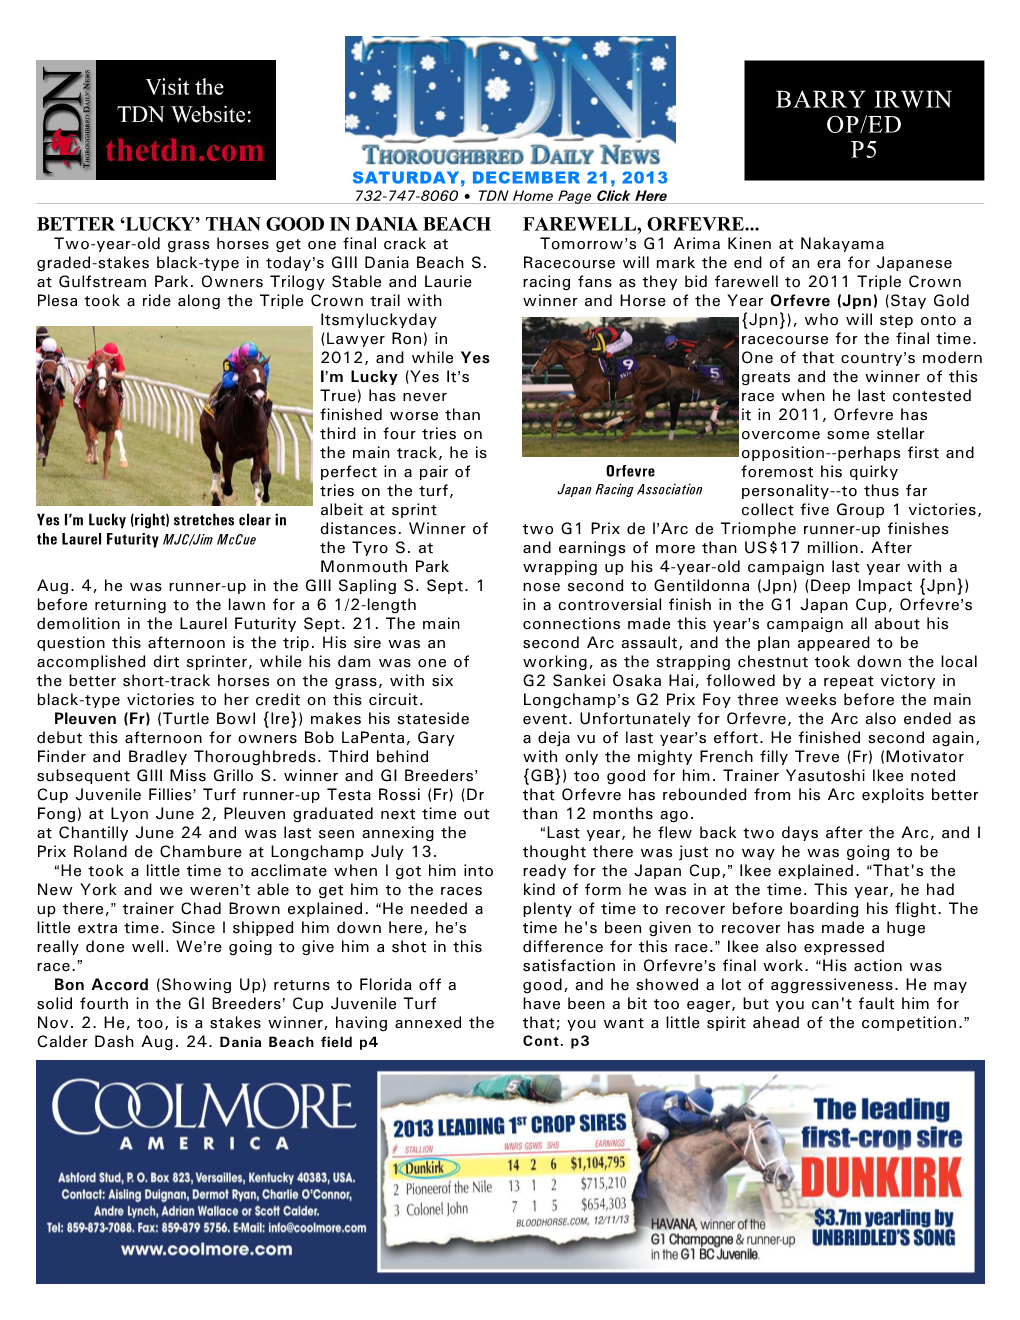 BARRY IRWIN OP/ED P5 SATURDAY, DECEMBER 21, 2013 732-747-8060 $ TDN Home Page Click Here BETTER ‘LUCKY’ THAN GOOD in DANIA BEACH FAREWELL, ORFEVRE